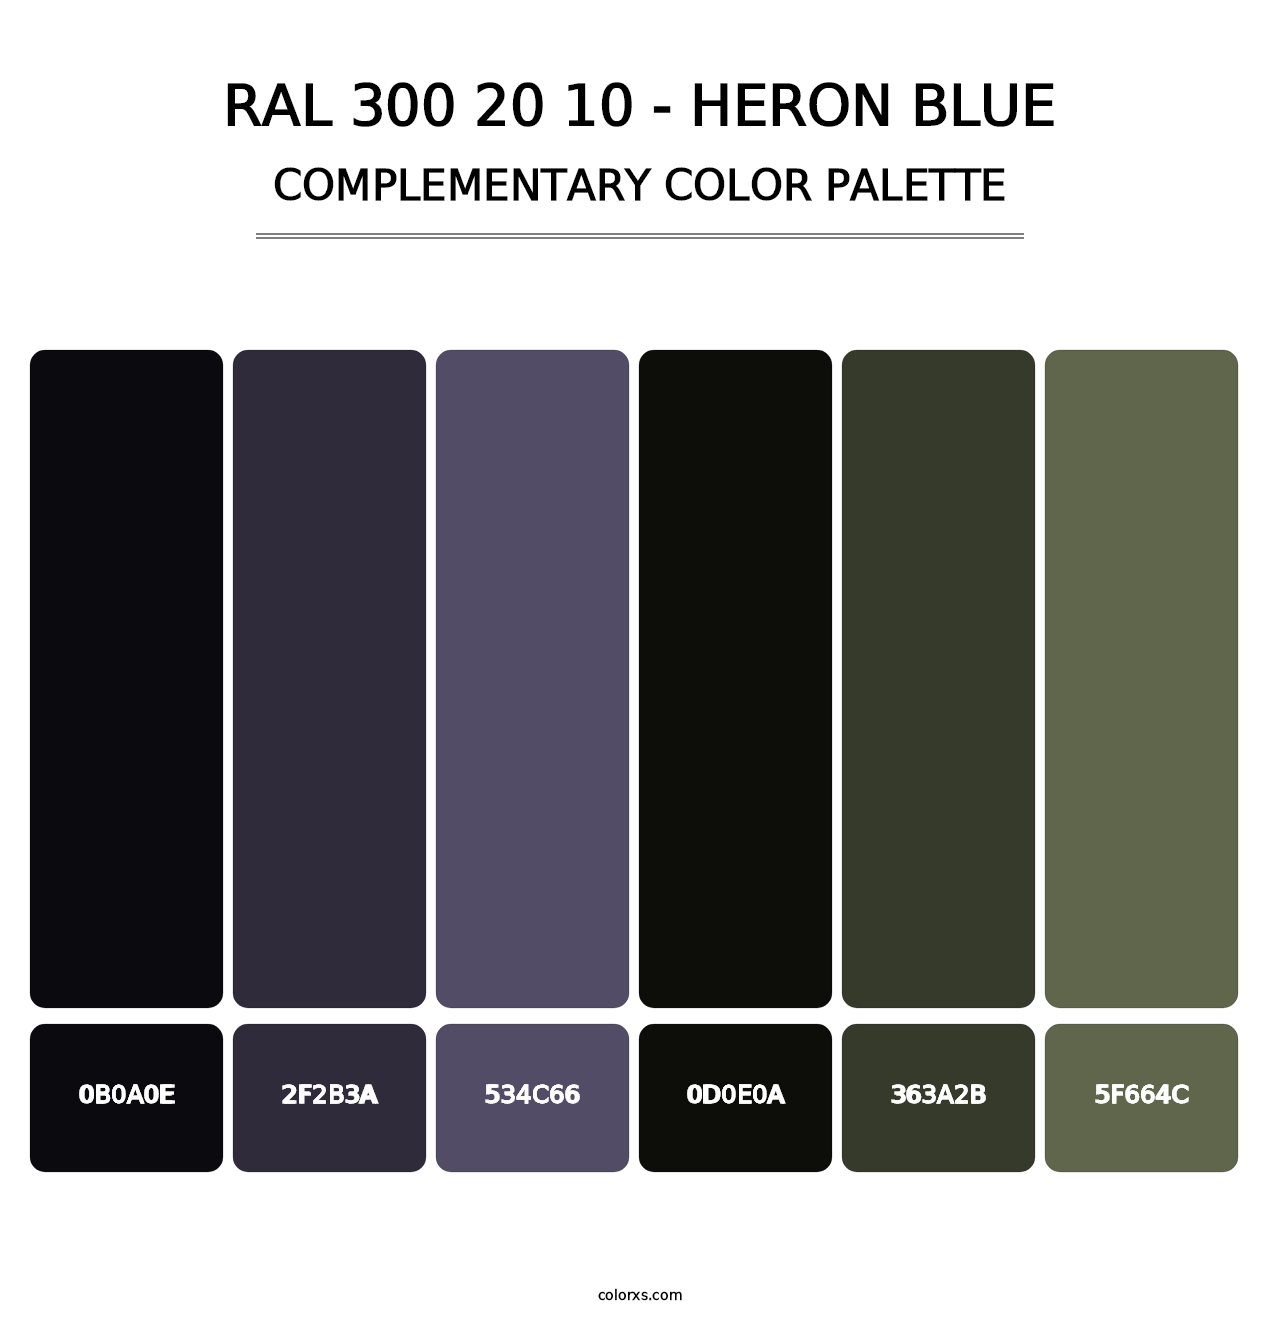 RAL 300 20 10 - Heron Blue - Complementary Color Palette